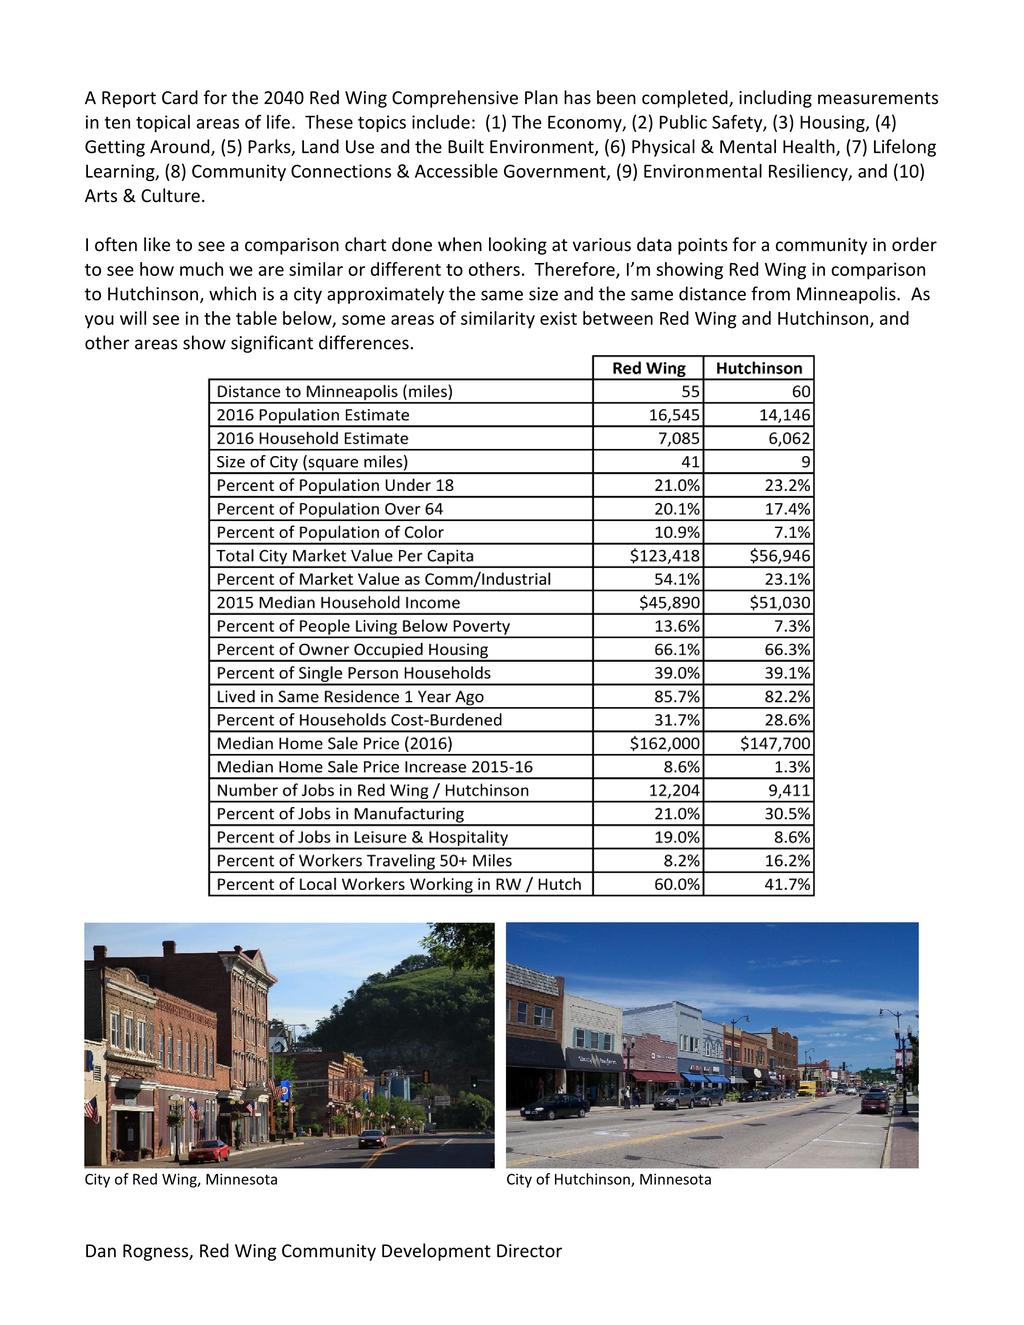 A Report Card for the 2040 Red Wing Comprehensive Plan has been completed, including measurements in ten topical areas of life.